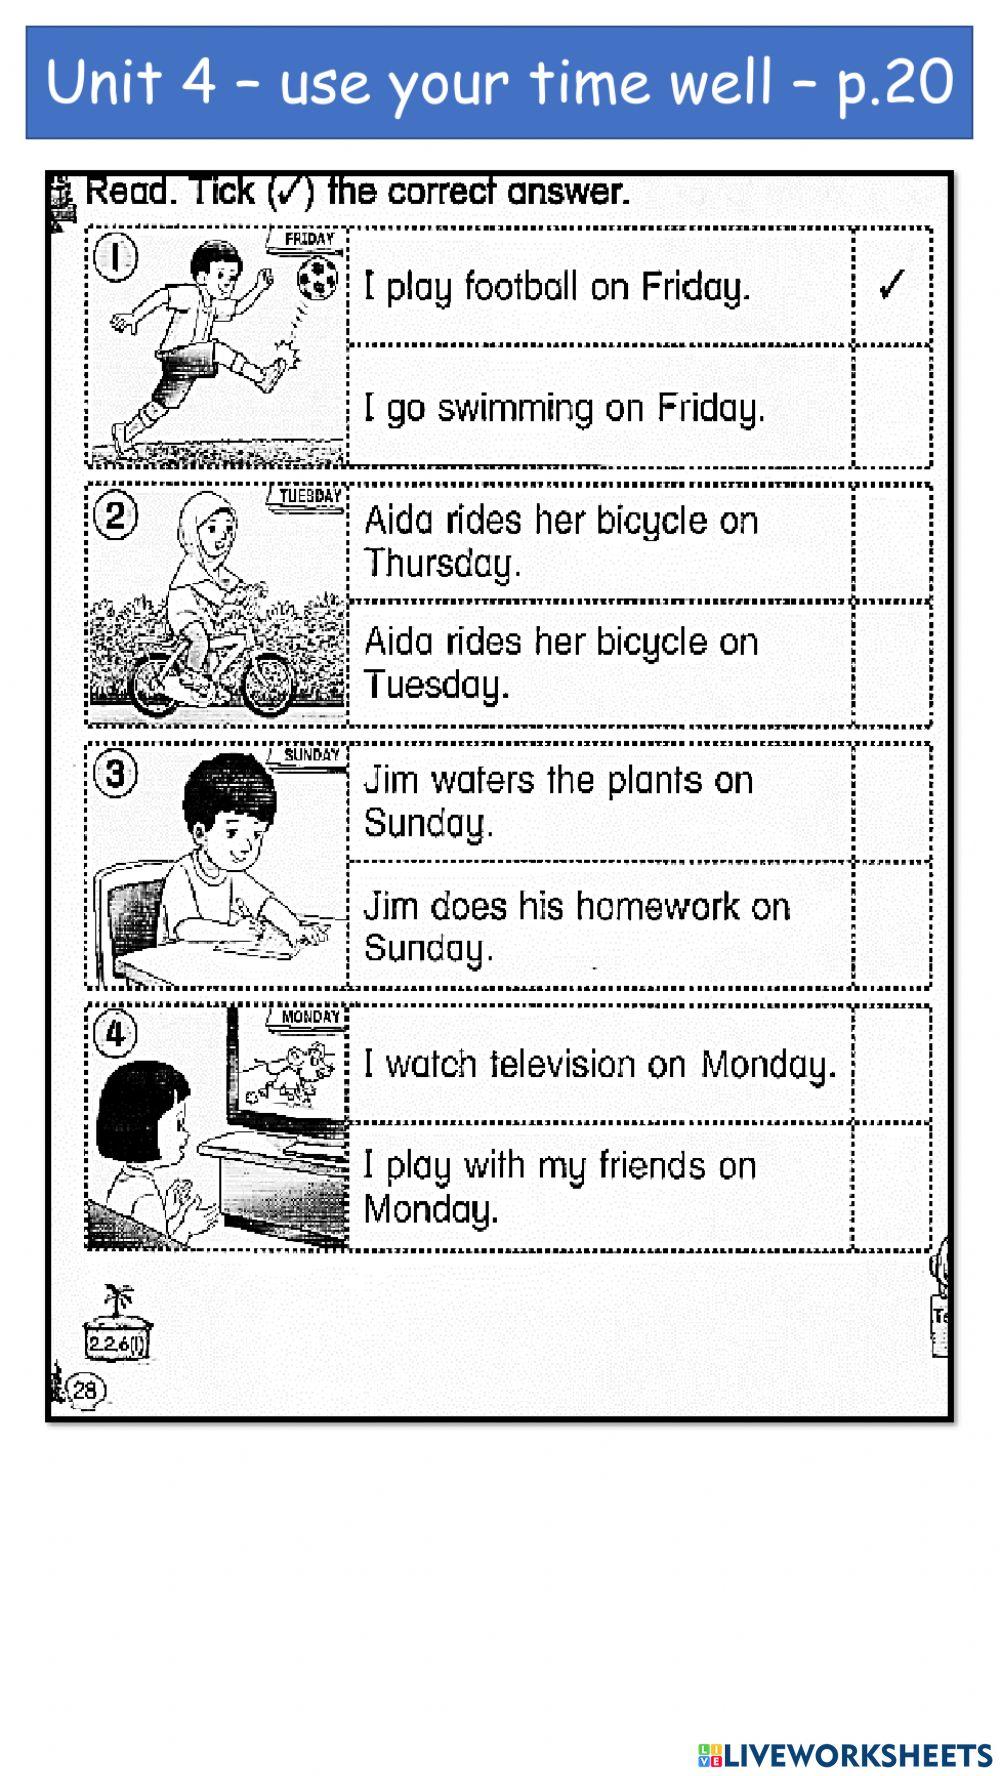 Standard 1 English - unit 4 - use your time well